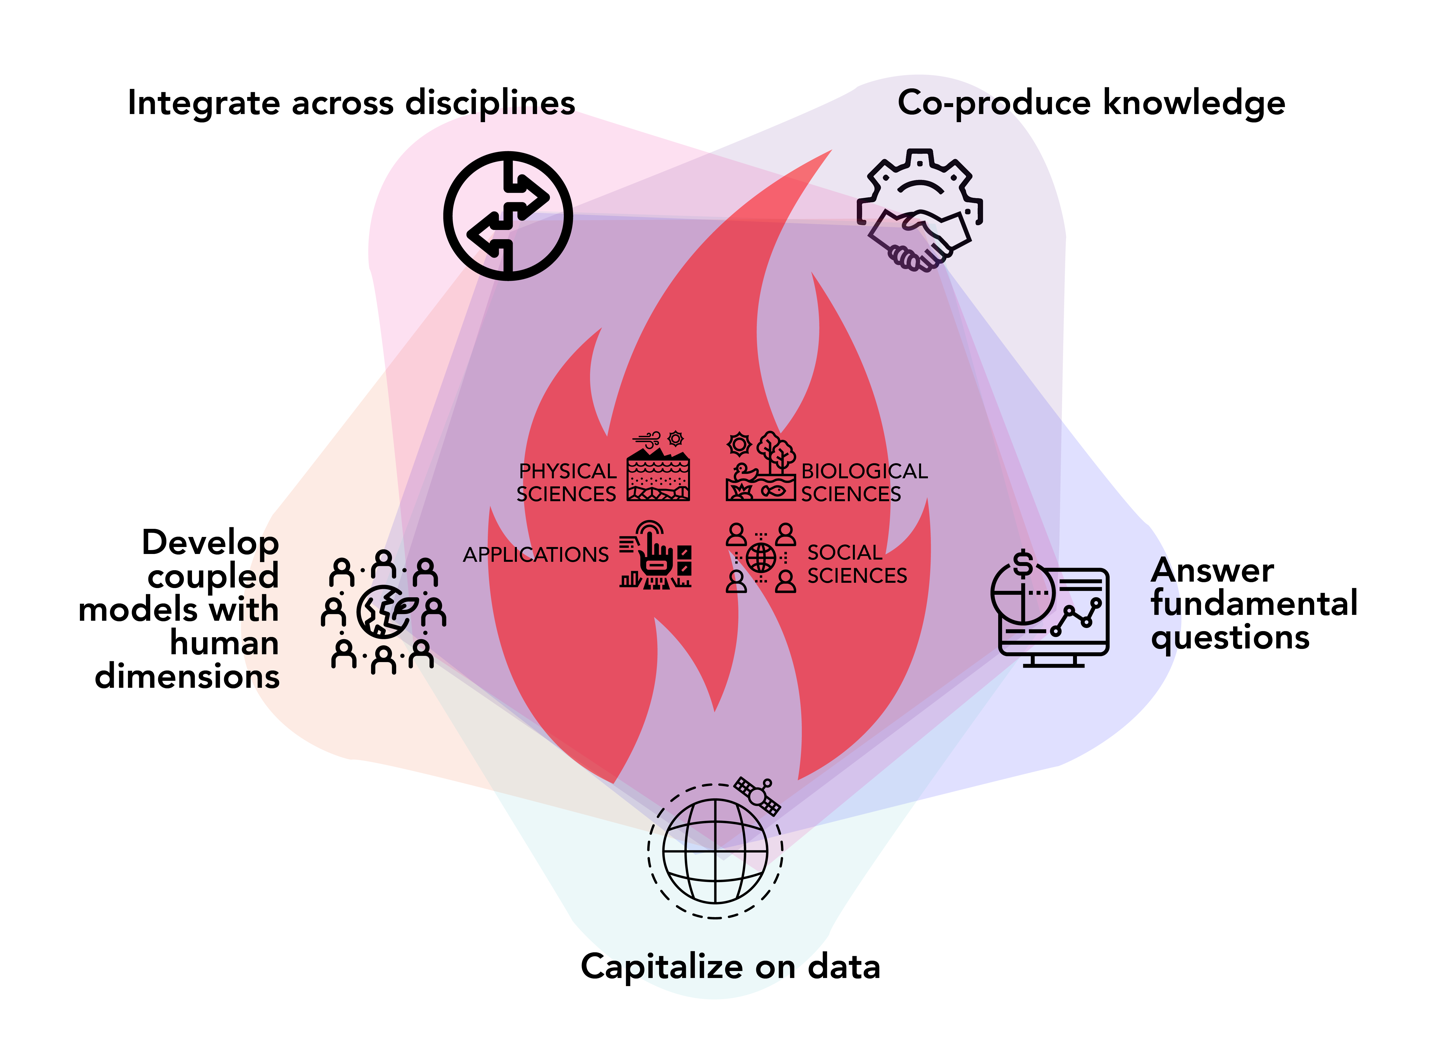 A proactive fire research agenda spans disciplines and translates to application while answering fundamental questions, incorporating diverse knowledge, capitalizing on new and existing data, and developing models integrating human dimensions and values.